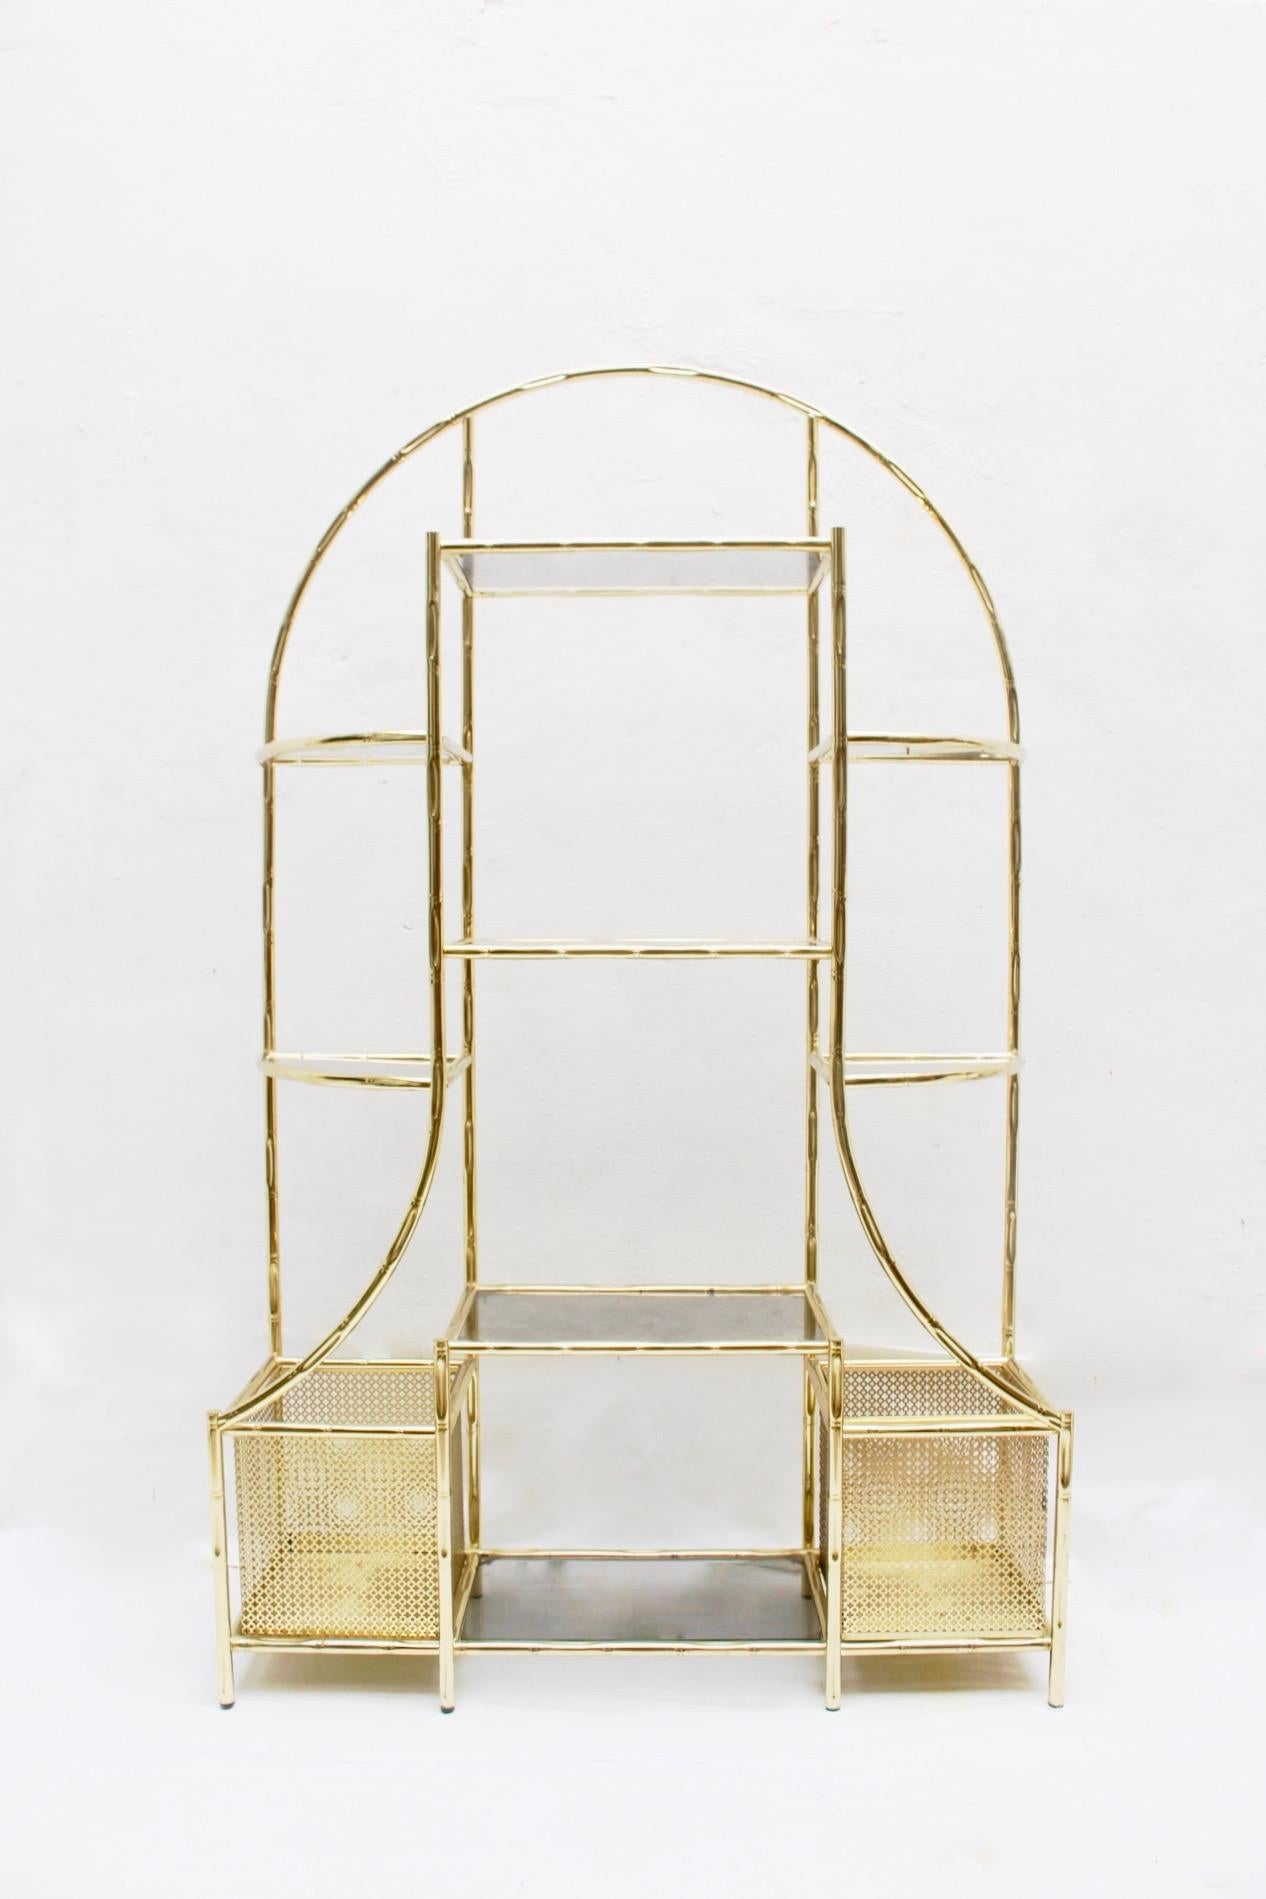 Midcentury Faux Bamboo Iron and Glass Étagère, Spain, 1970s For Sale 3